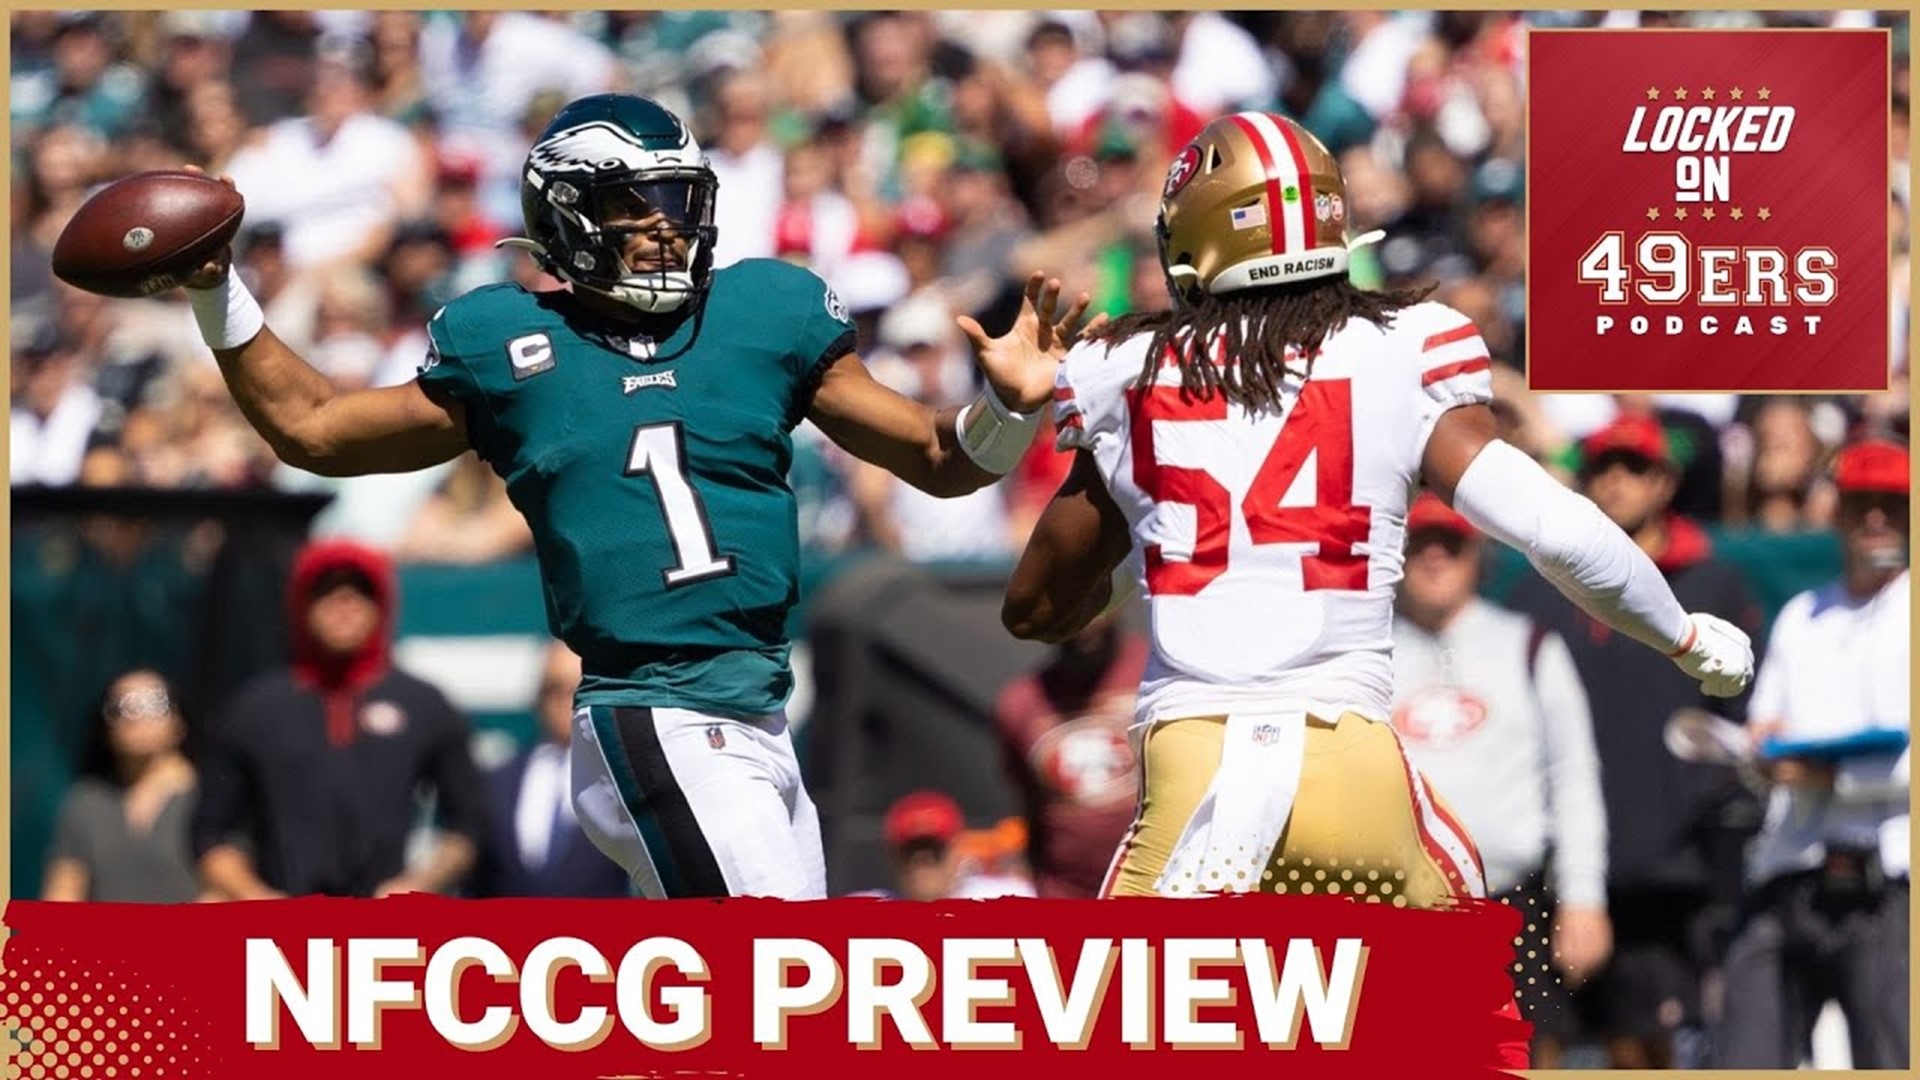 The two best teams in the NFC face off Sunday in the NFC Championship Game when the San Francisco 49ers visit the Philadelphia Eagles.